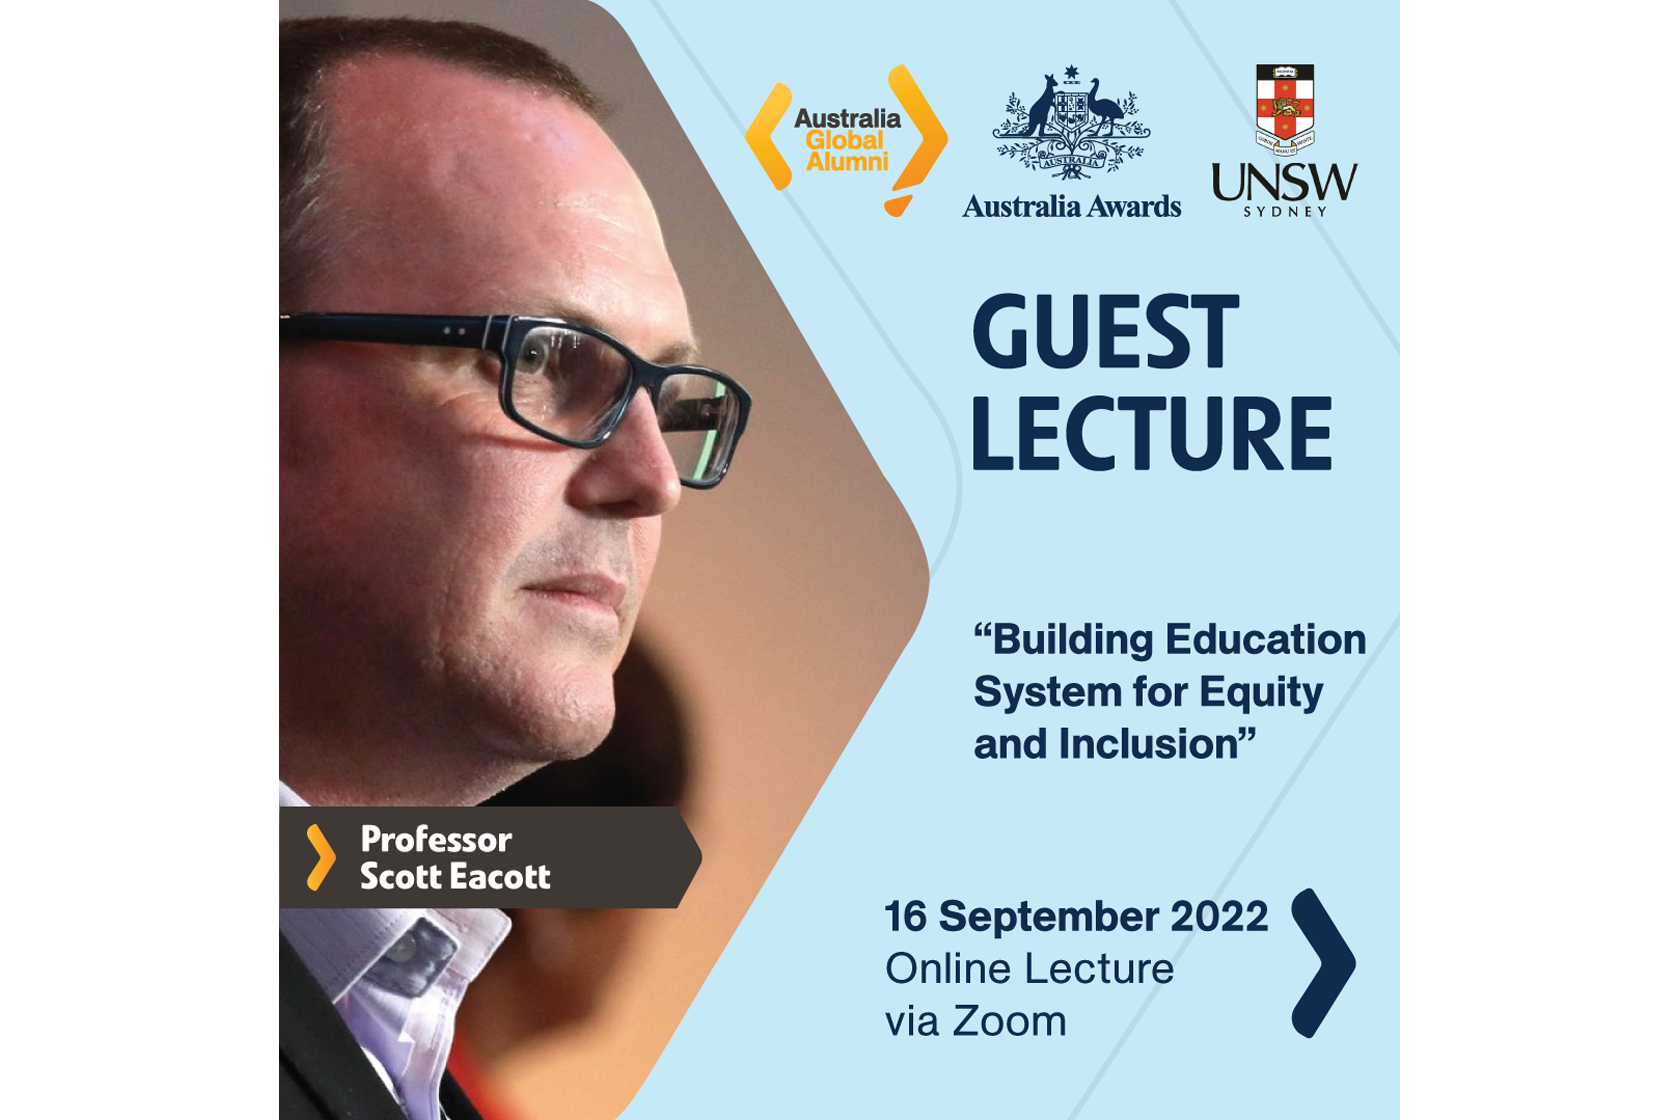 Join Our Lecture on “Building Education System for Equity and Inclusion”